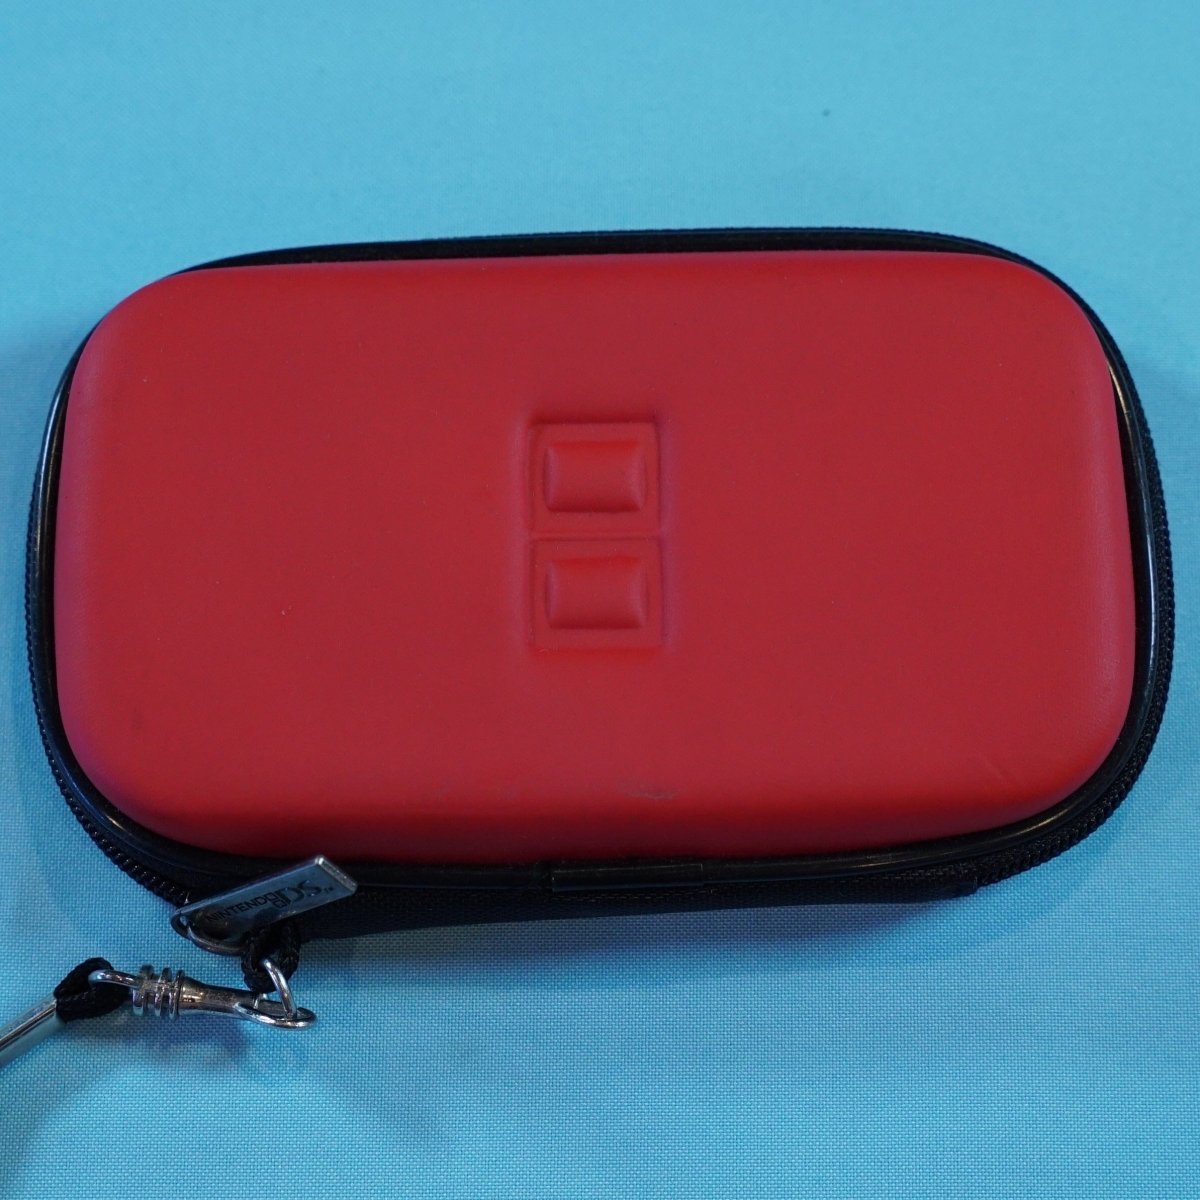 Original Red Nintendo DS Clamshell Carrying Case (Used) - Retro Island Gaming